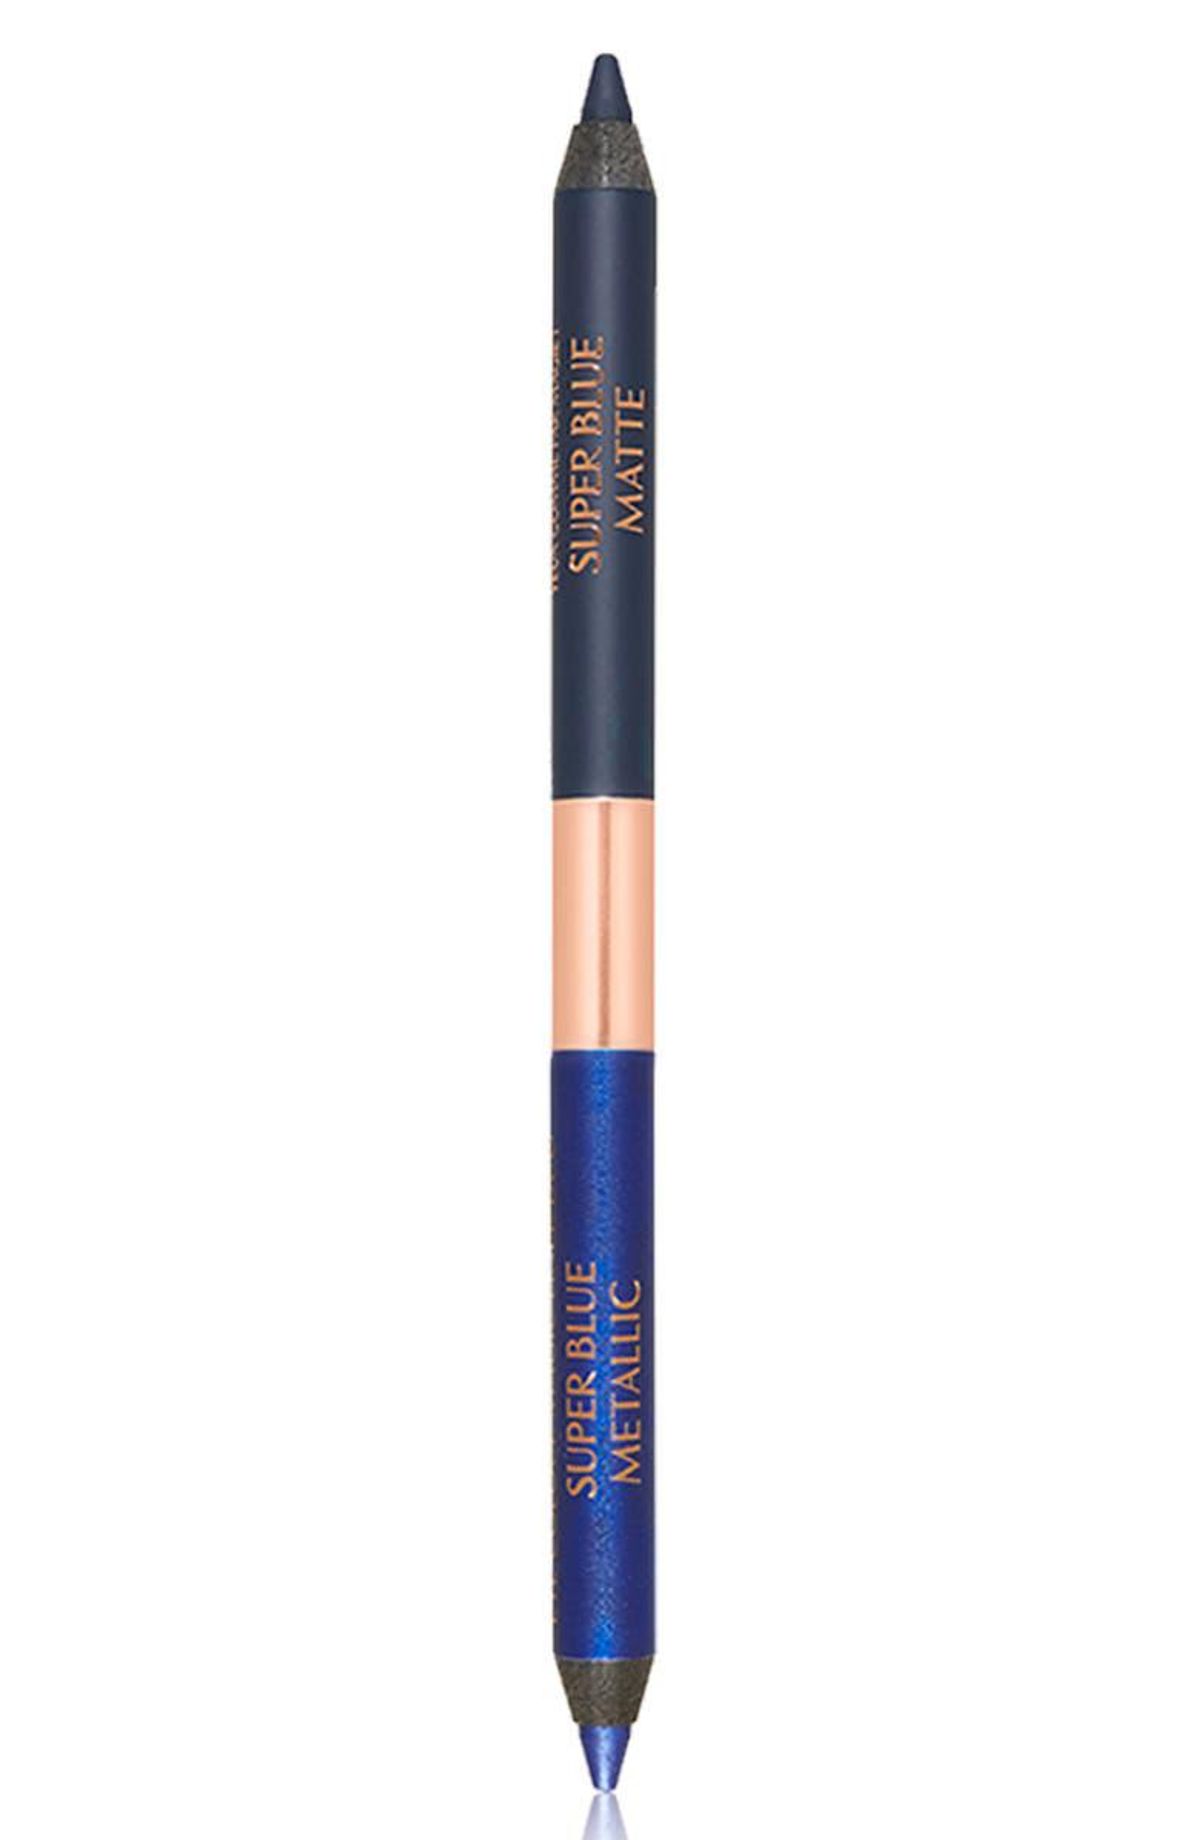 Eye Colour Magic Duo Liner in Super Blue